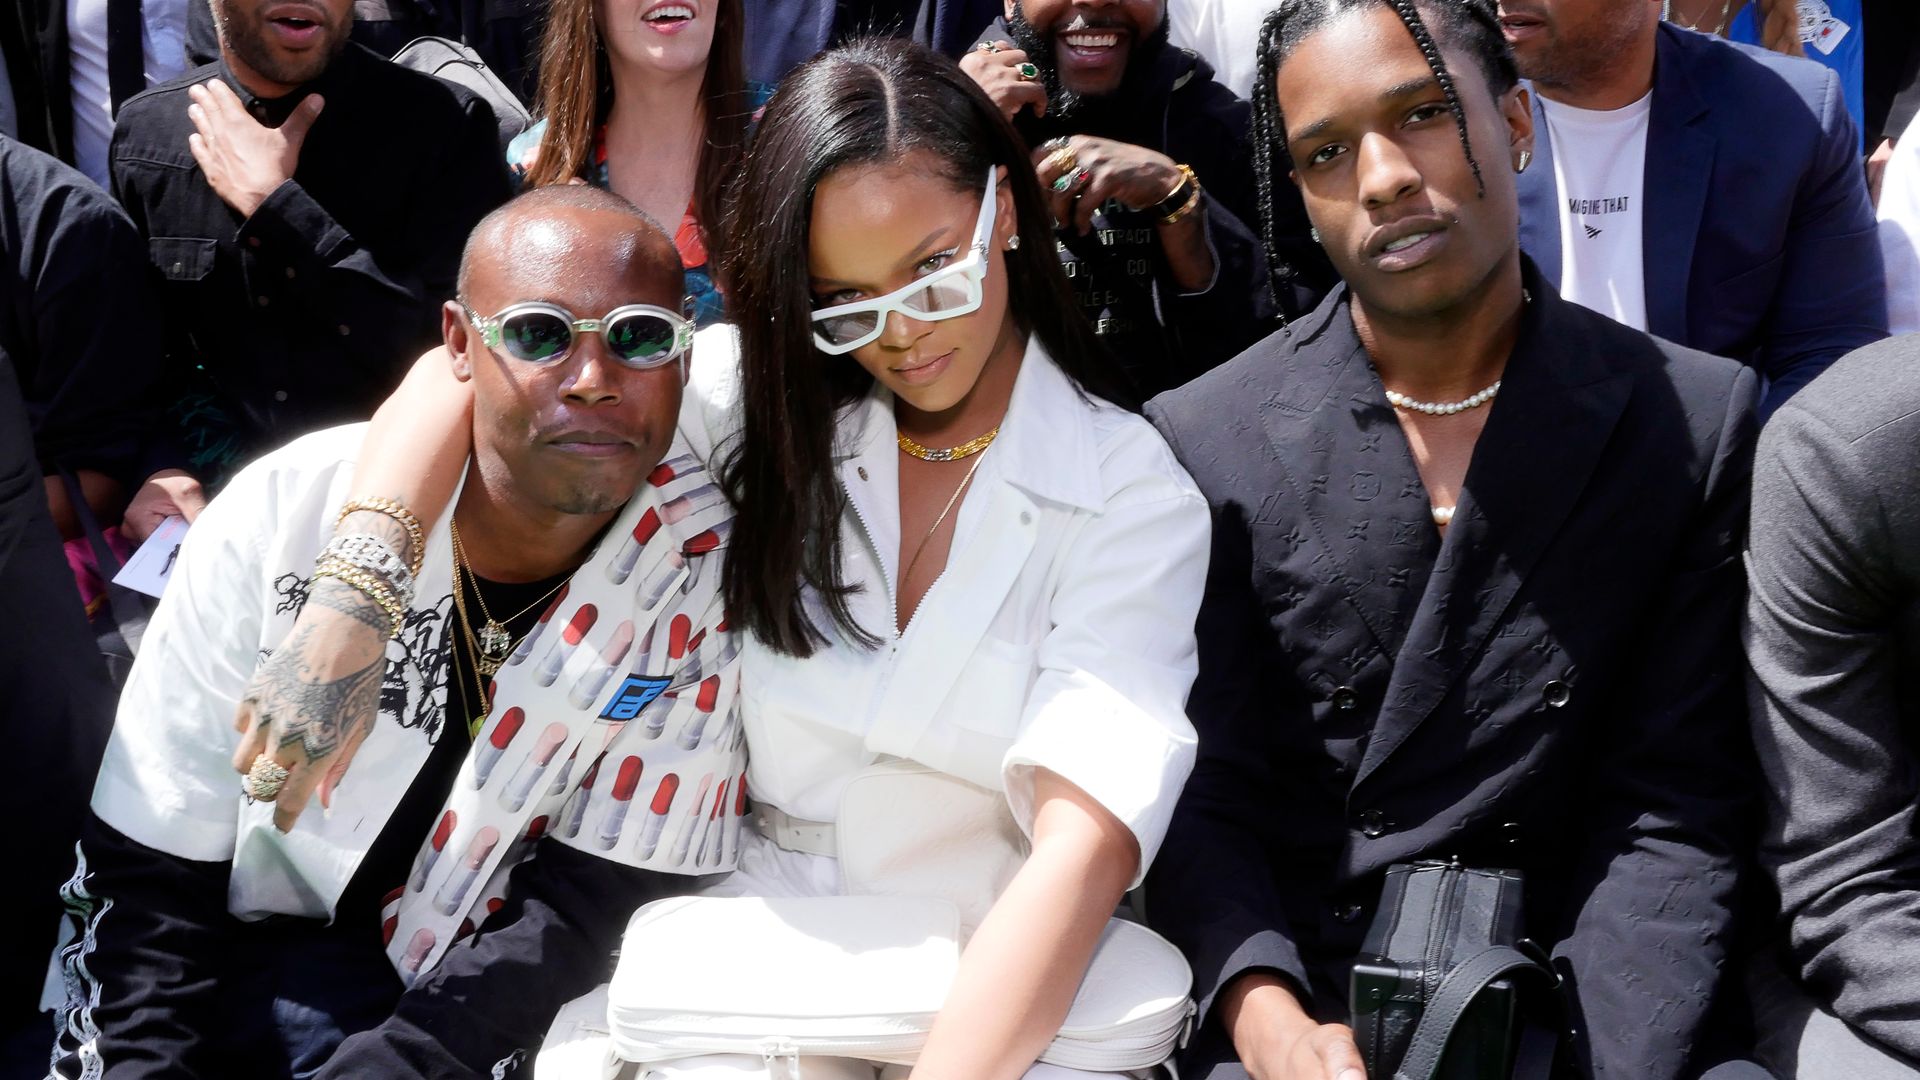 Rihanna and Asap Rocky sat with others at a fashion show